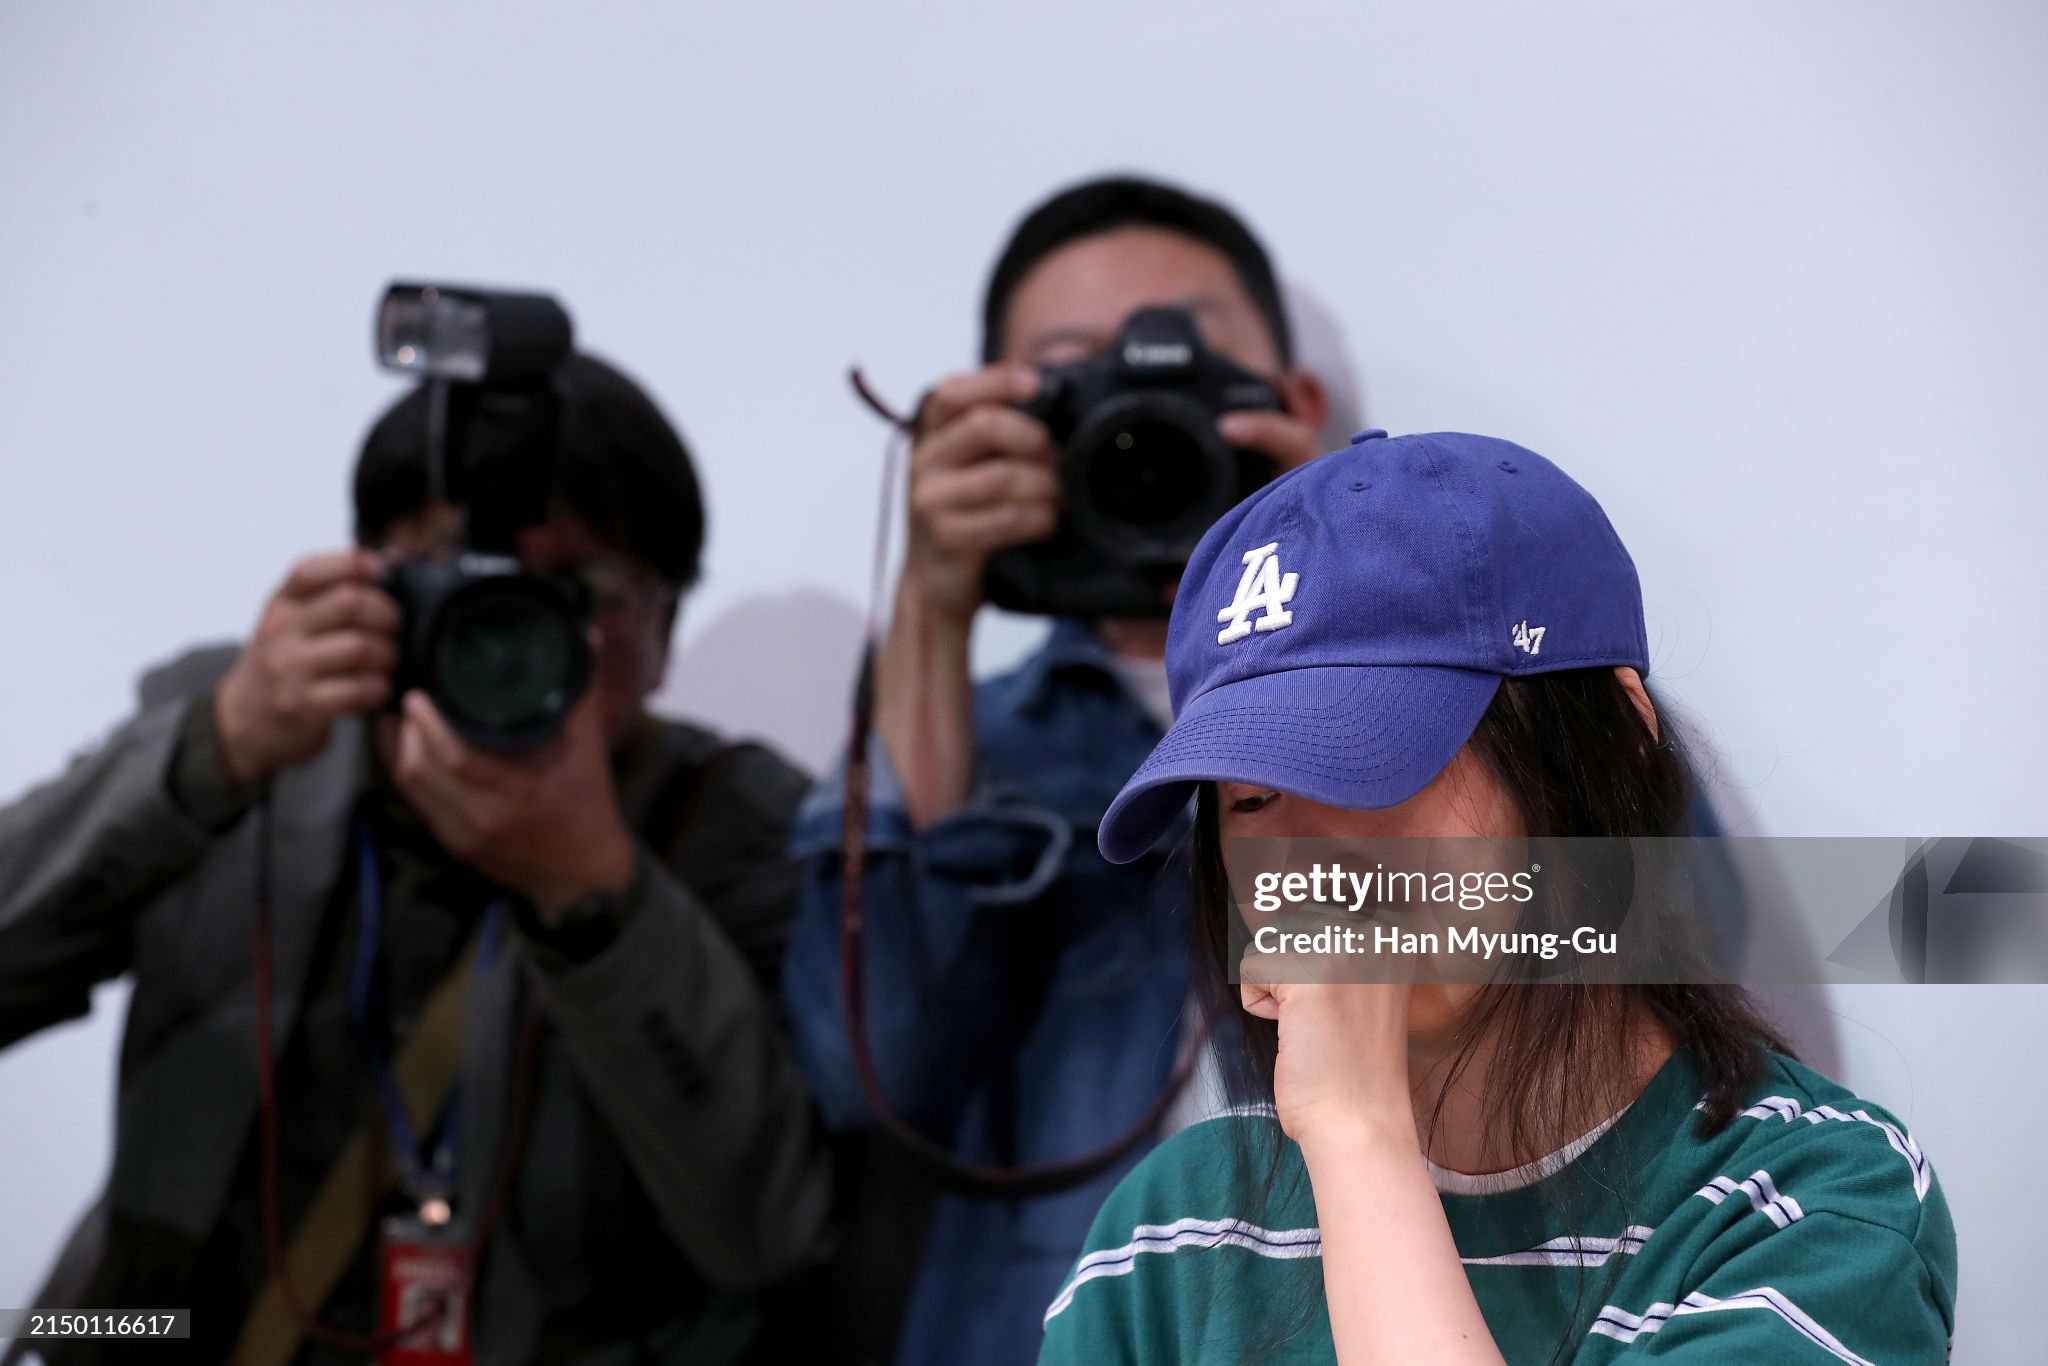 gettyimages-2150116617-2048x2048.jpg